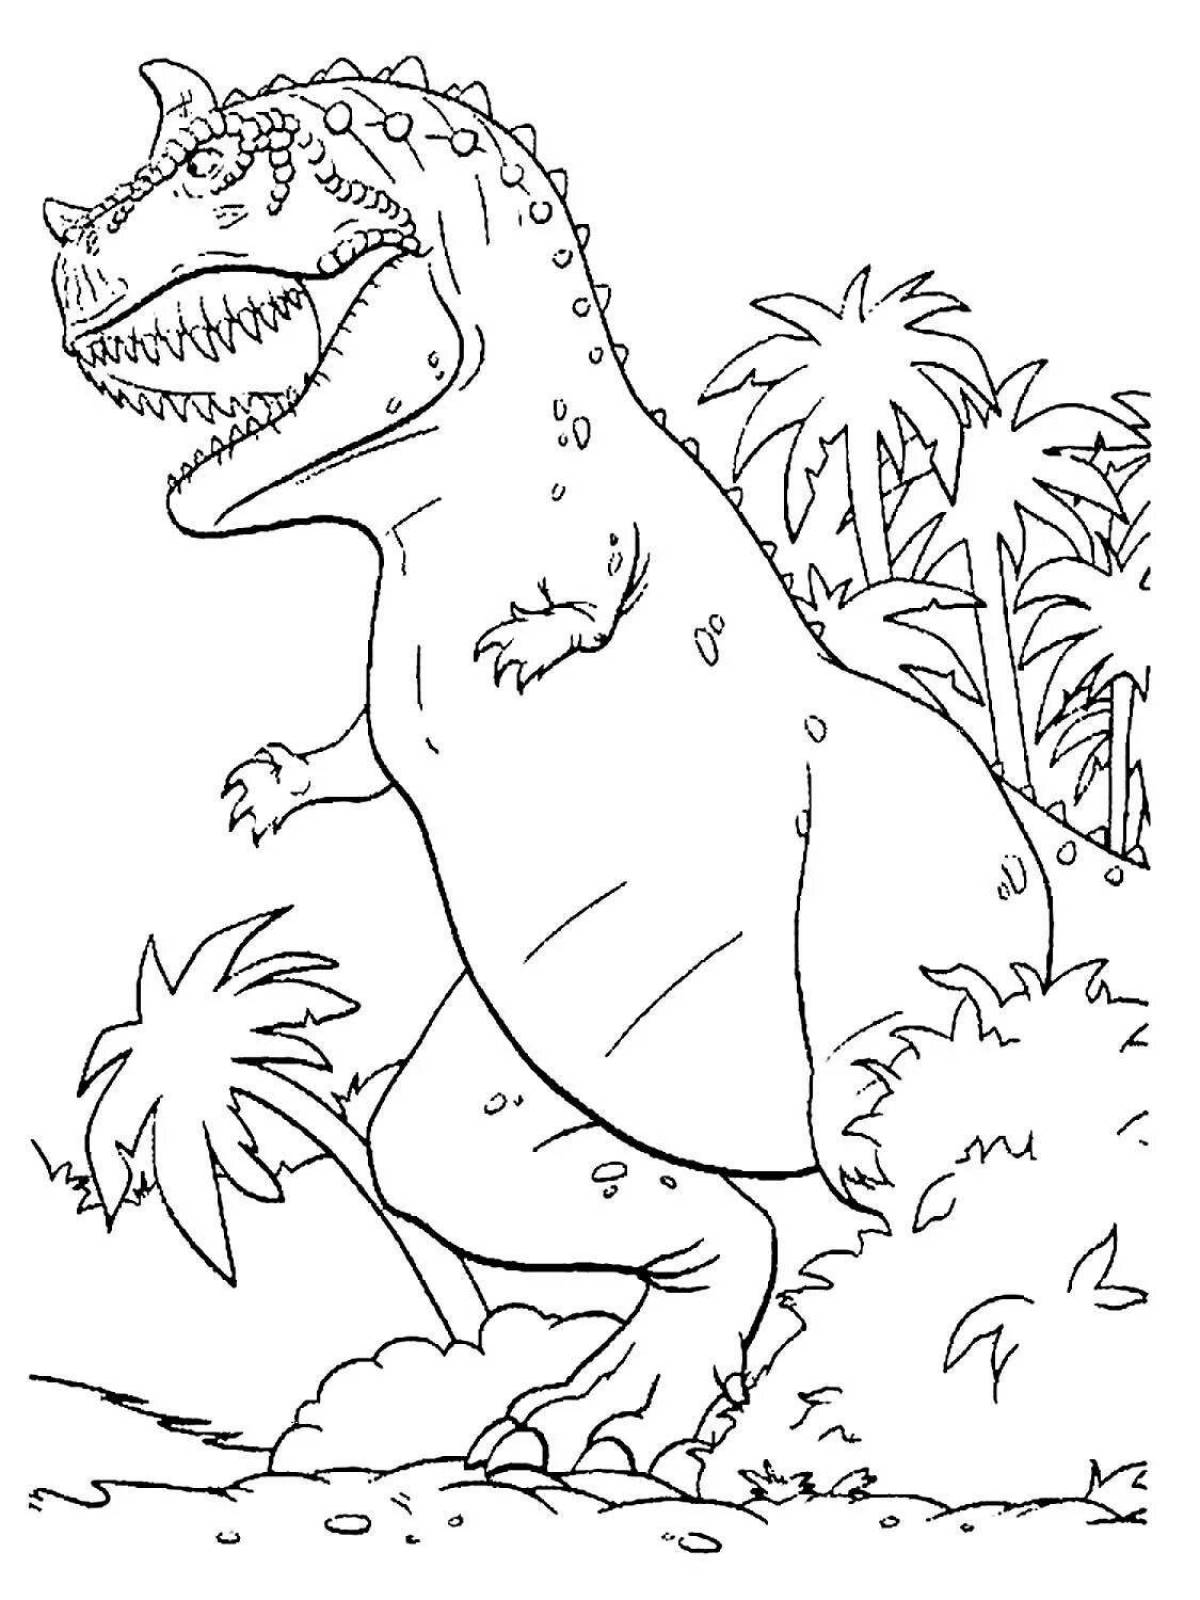 Coloring page graceful carnosaurus